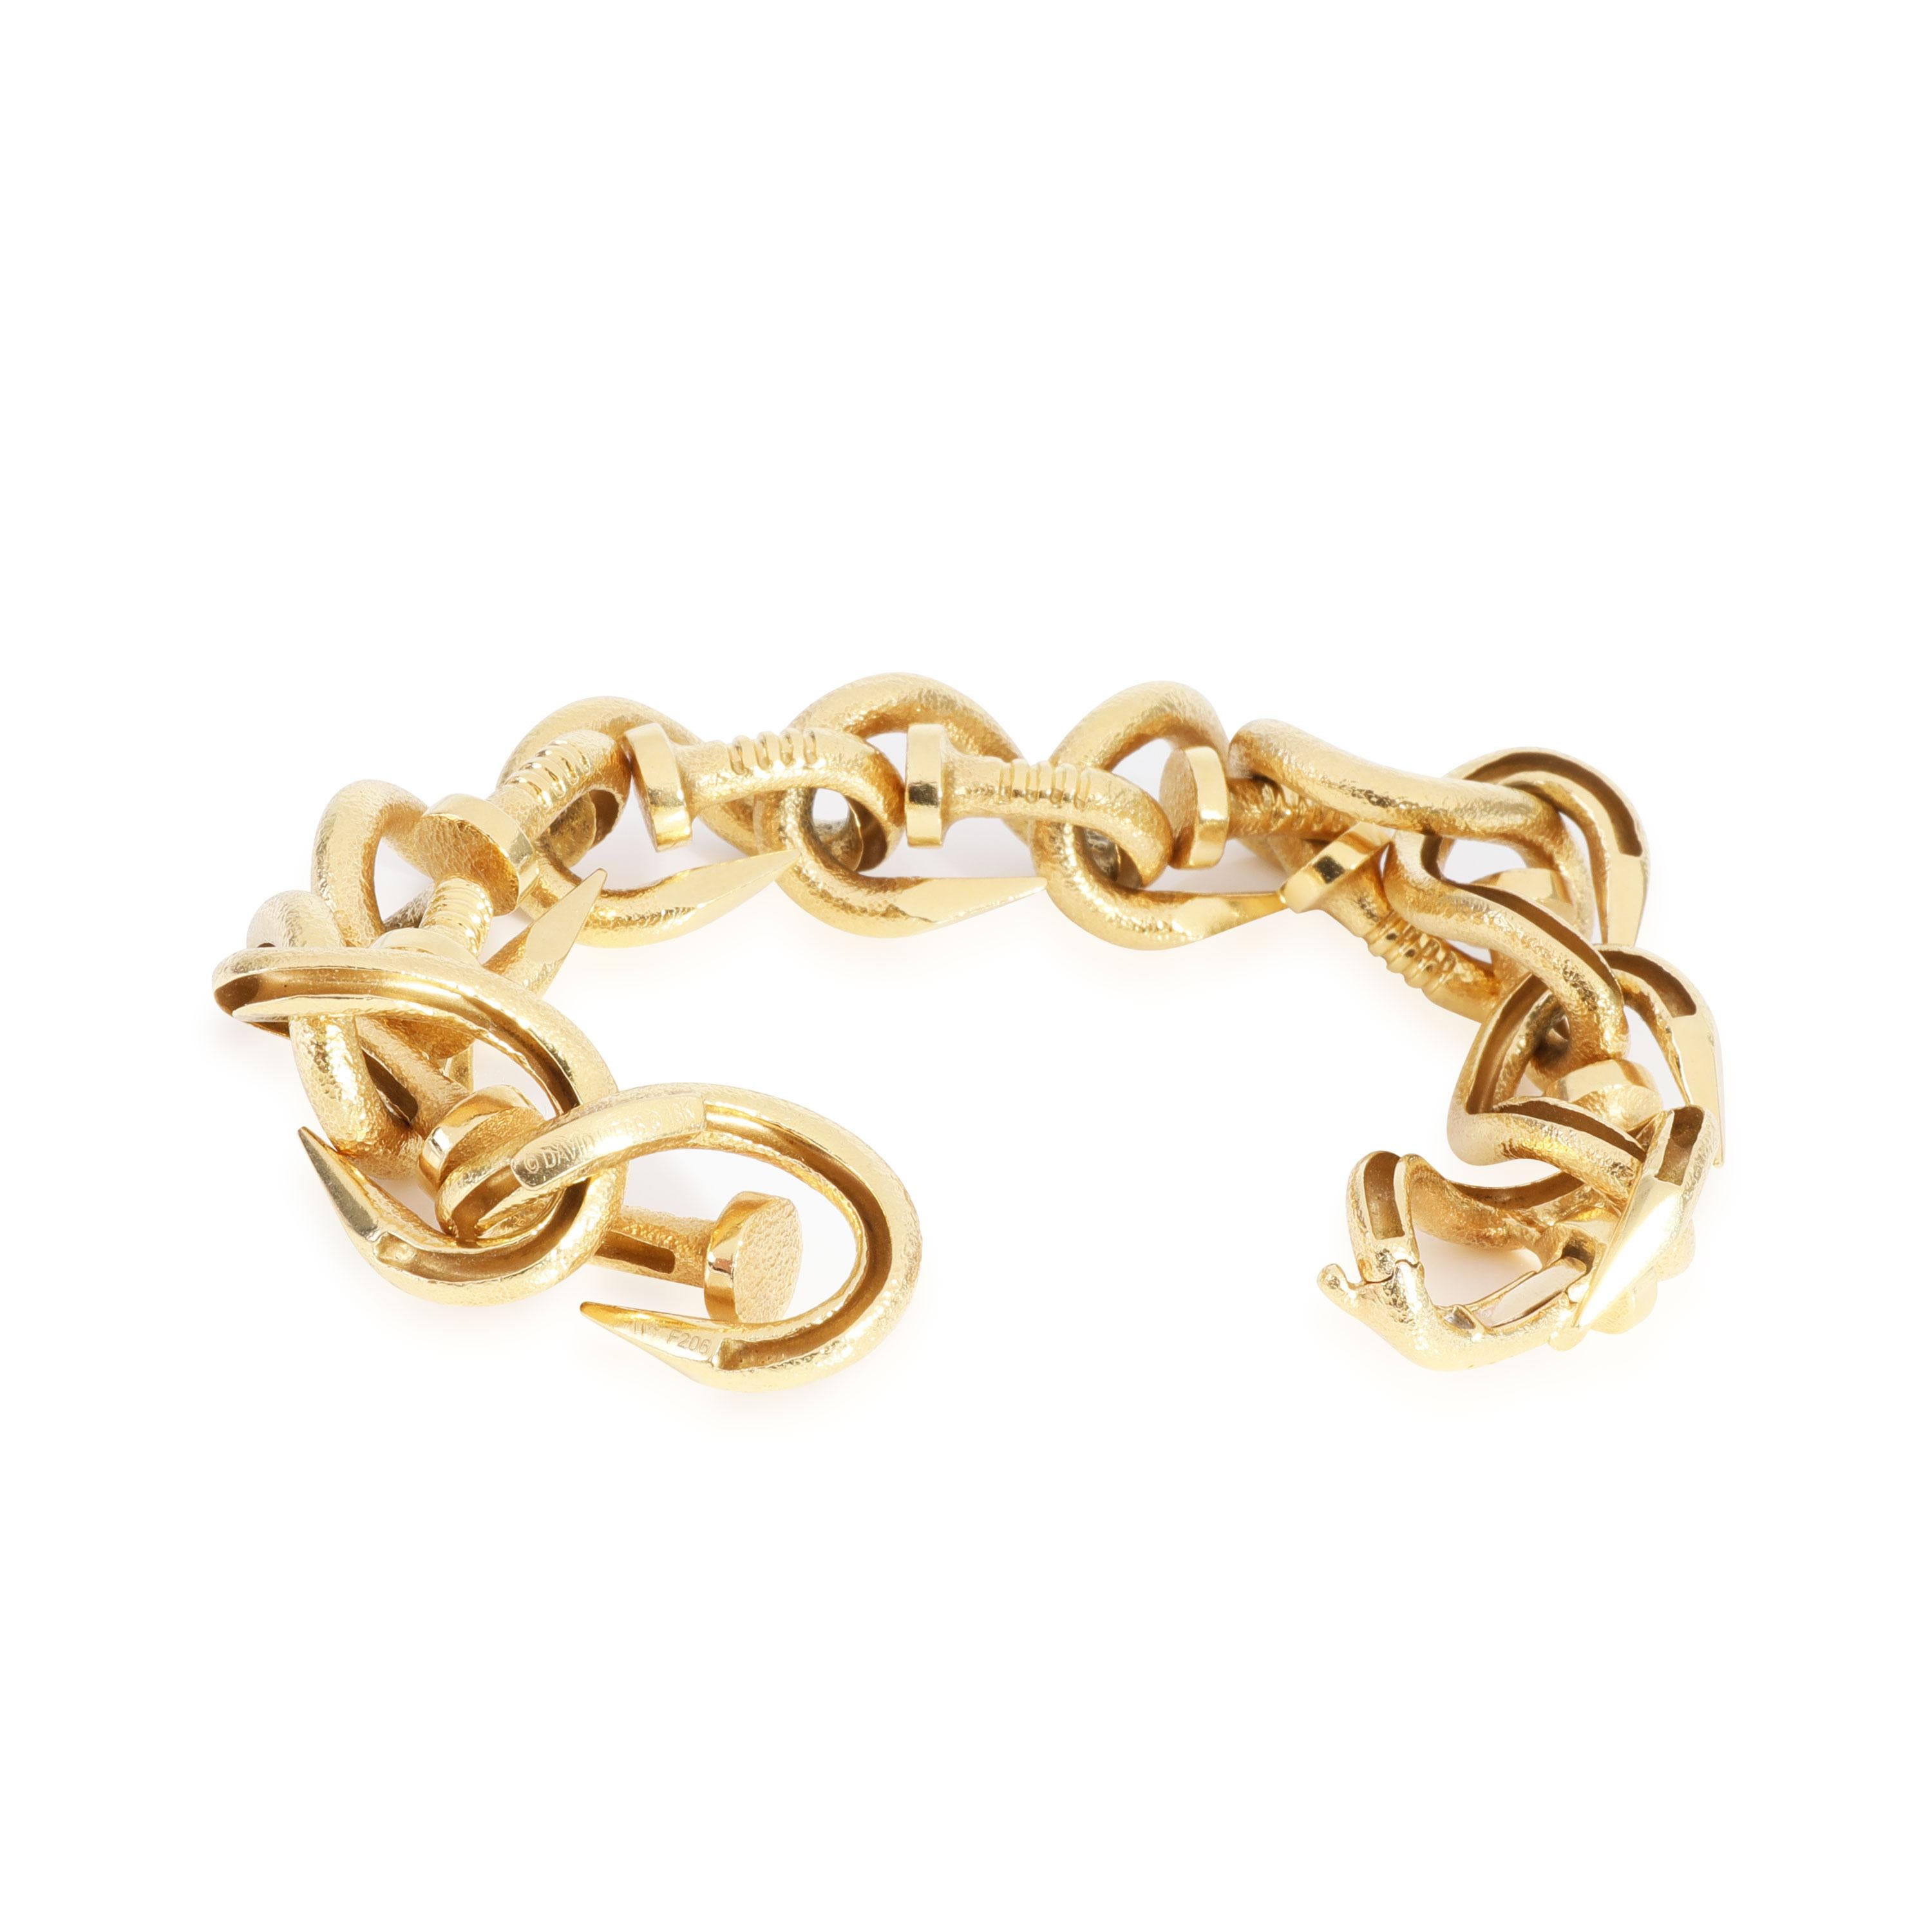 David Webb Hammered Nail Bracelet in 18K Yellow Gold

PRIMARY DETAILS
SKU: 118722
Listing Title: David Webb Hammered Nail Bracelet in 18K Yellow Gold
Condition Description: Retails for 16800 USD. In excellent condition and recently polished. Chain